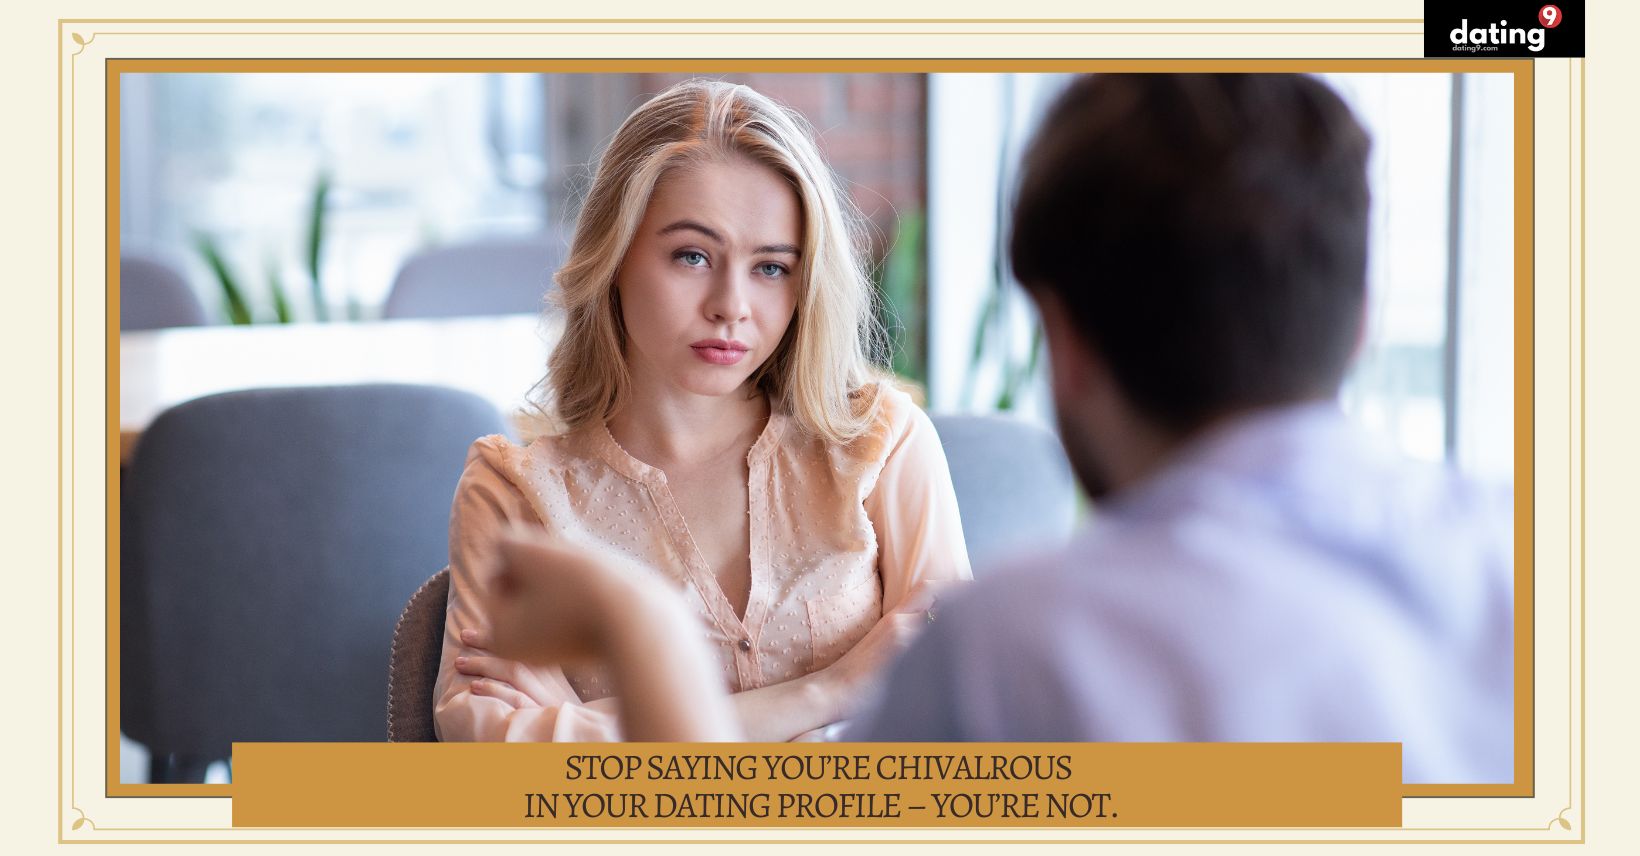 Stop Saying You're Chivalrous in Your Dating Profile - You're Not.